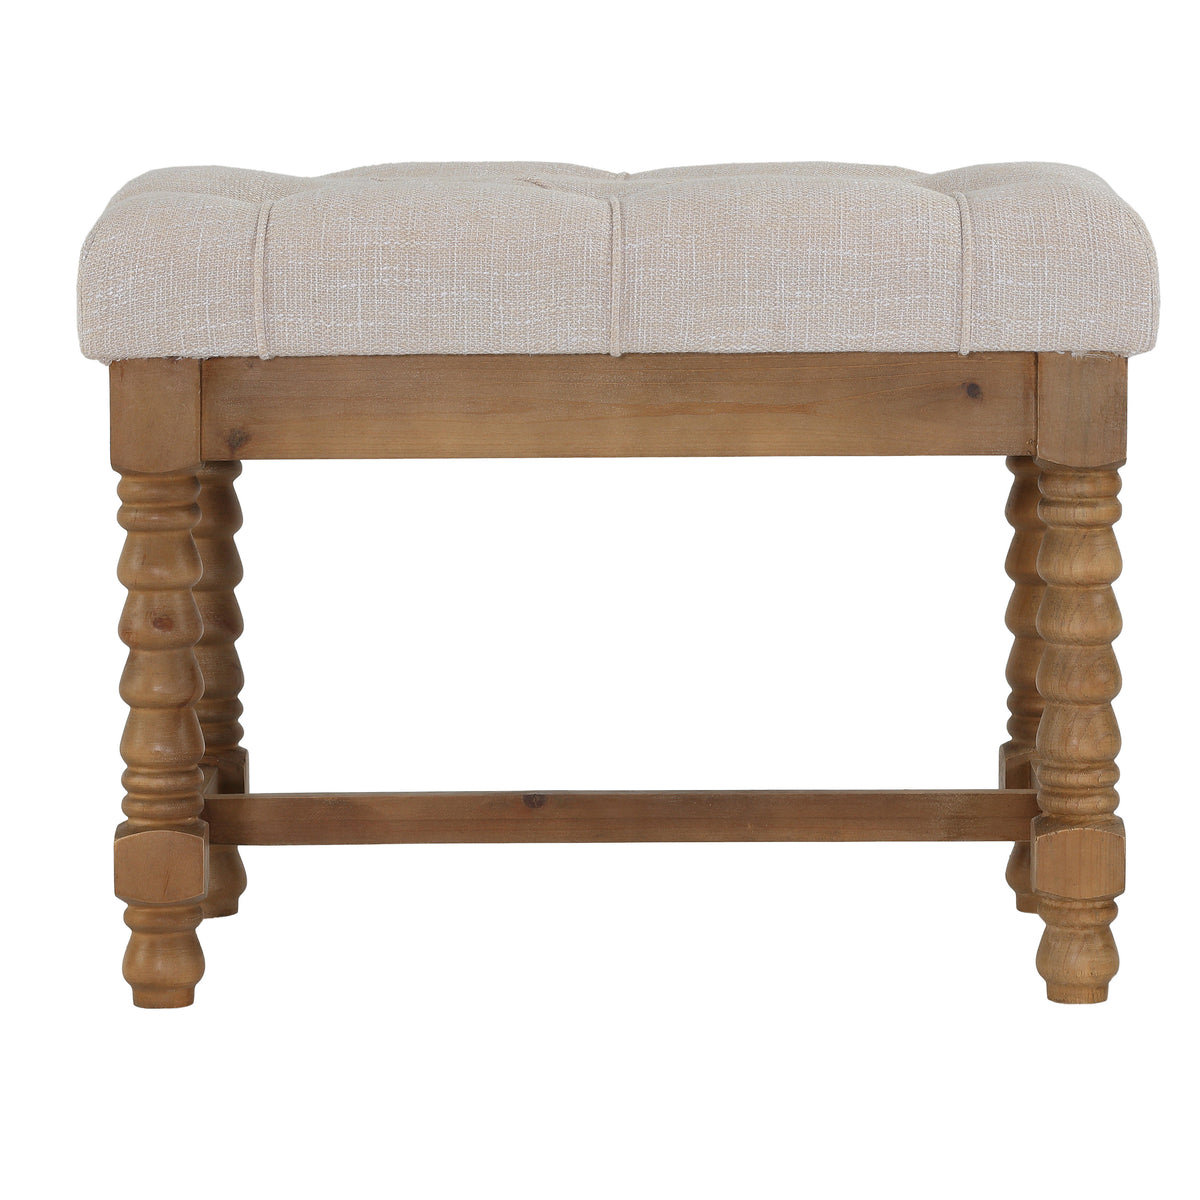 Cortesi Home Tacoma Wooden Ottoman in Beige, Tufted